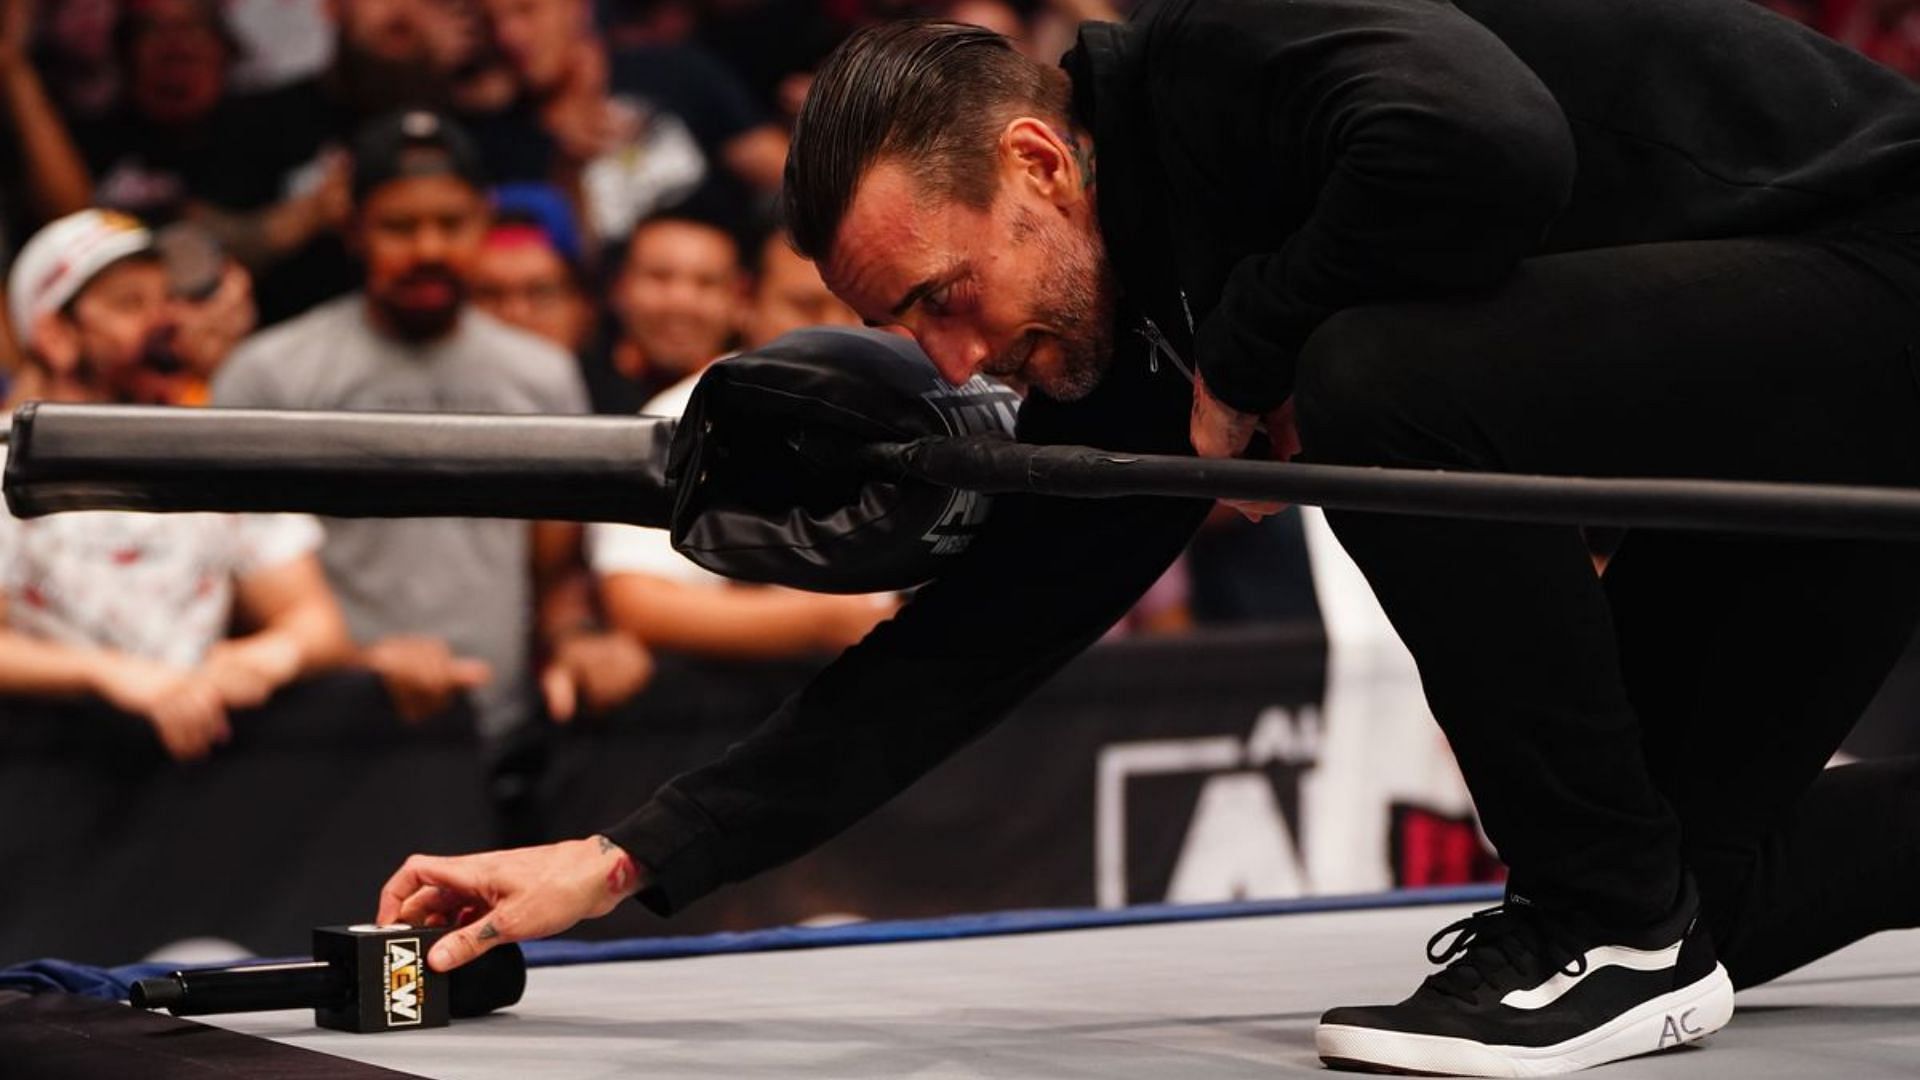 Could this move have solved tensions backstage in AEW?